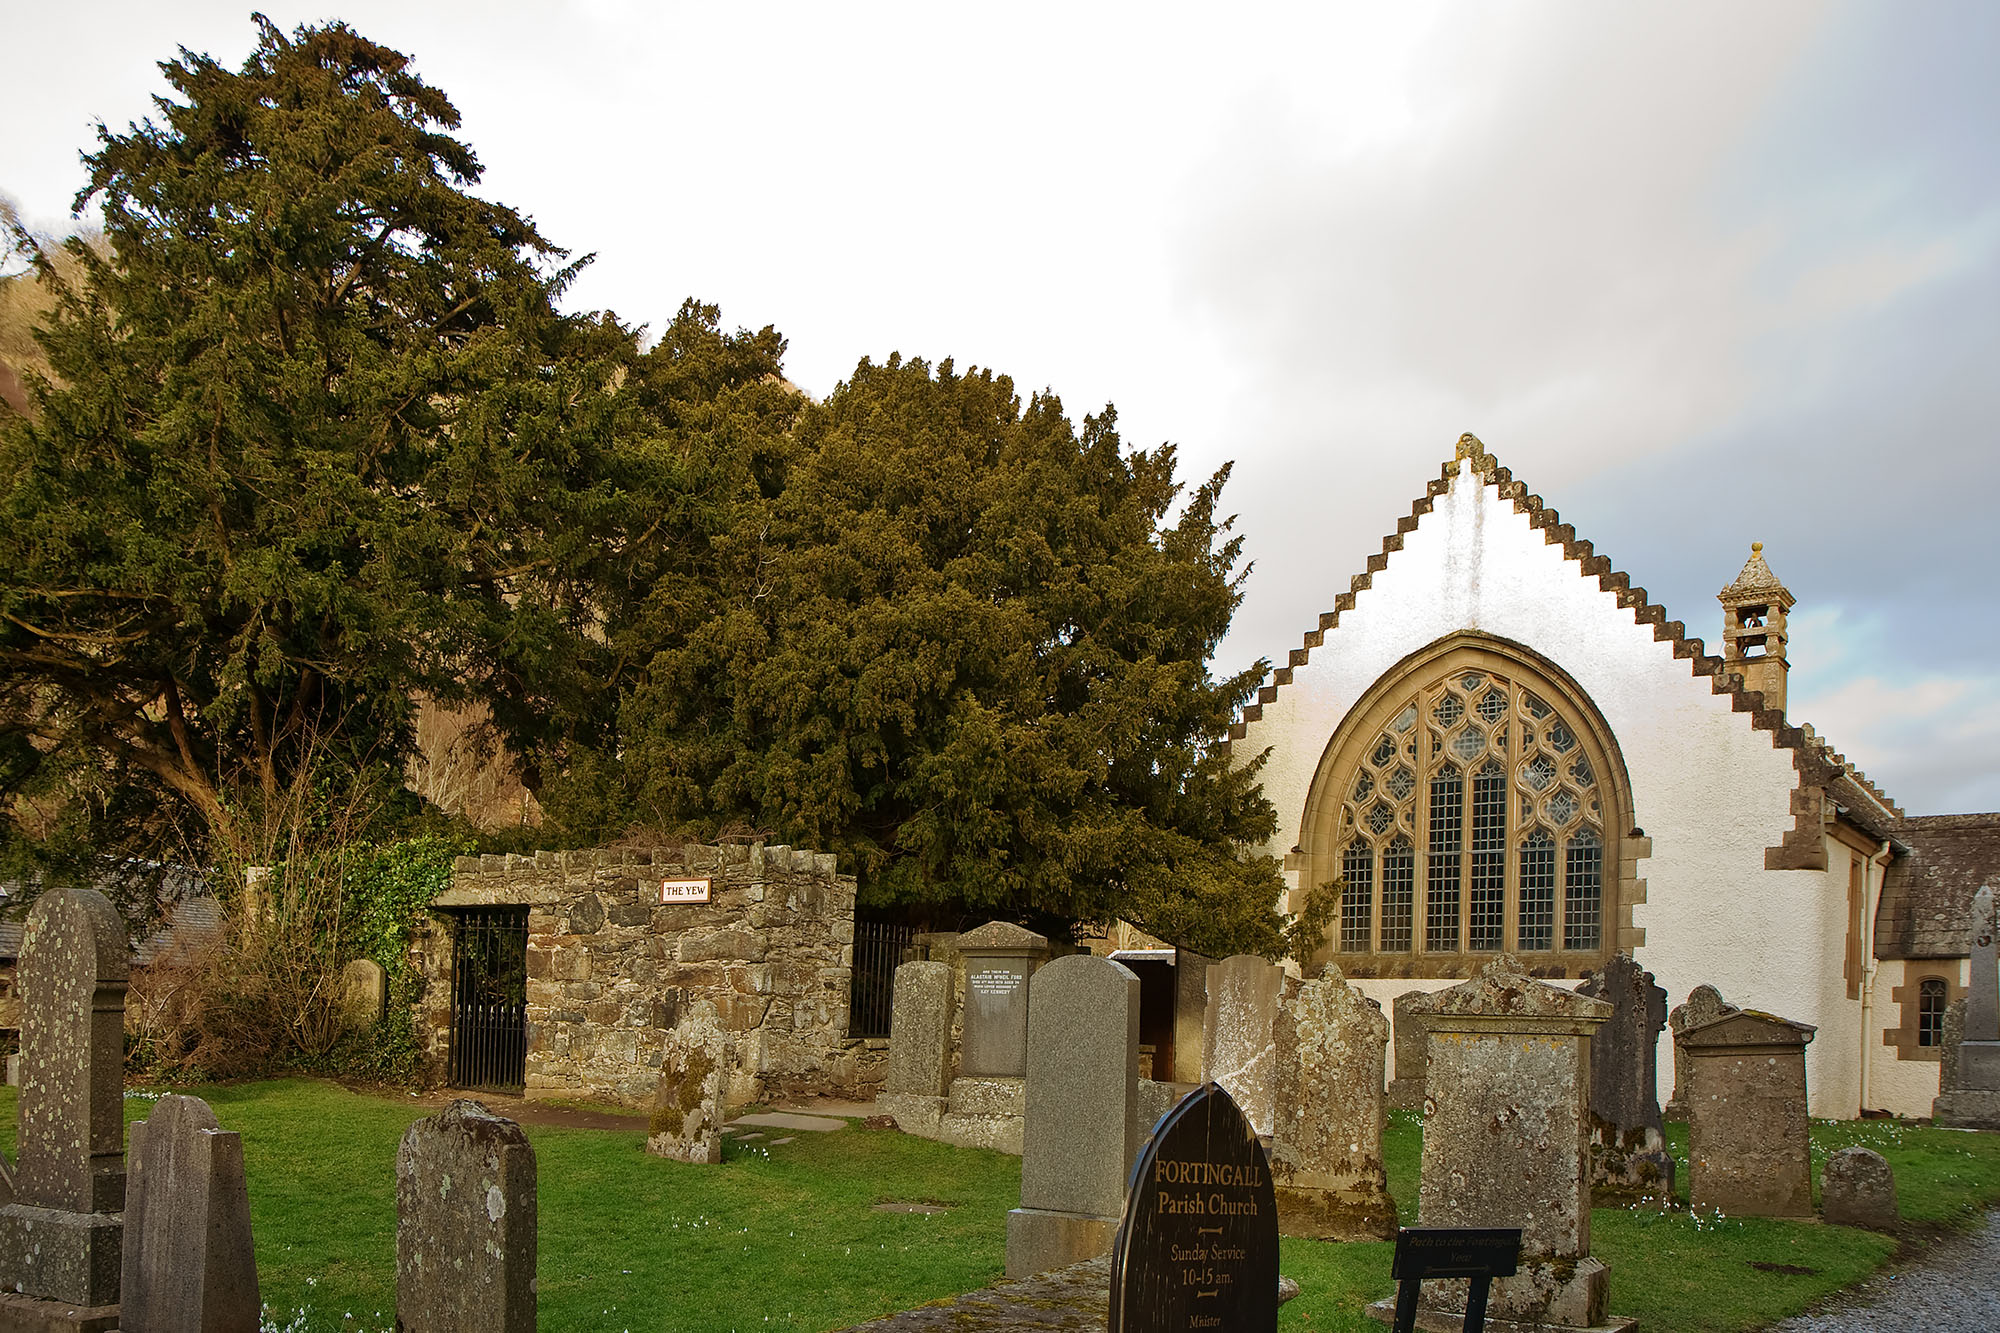 Fortingall Yew Tree (Taxus baccata), Perthshire